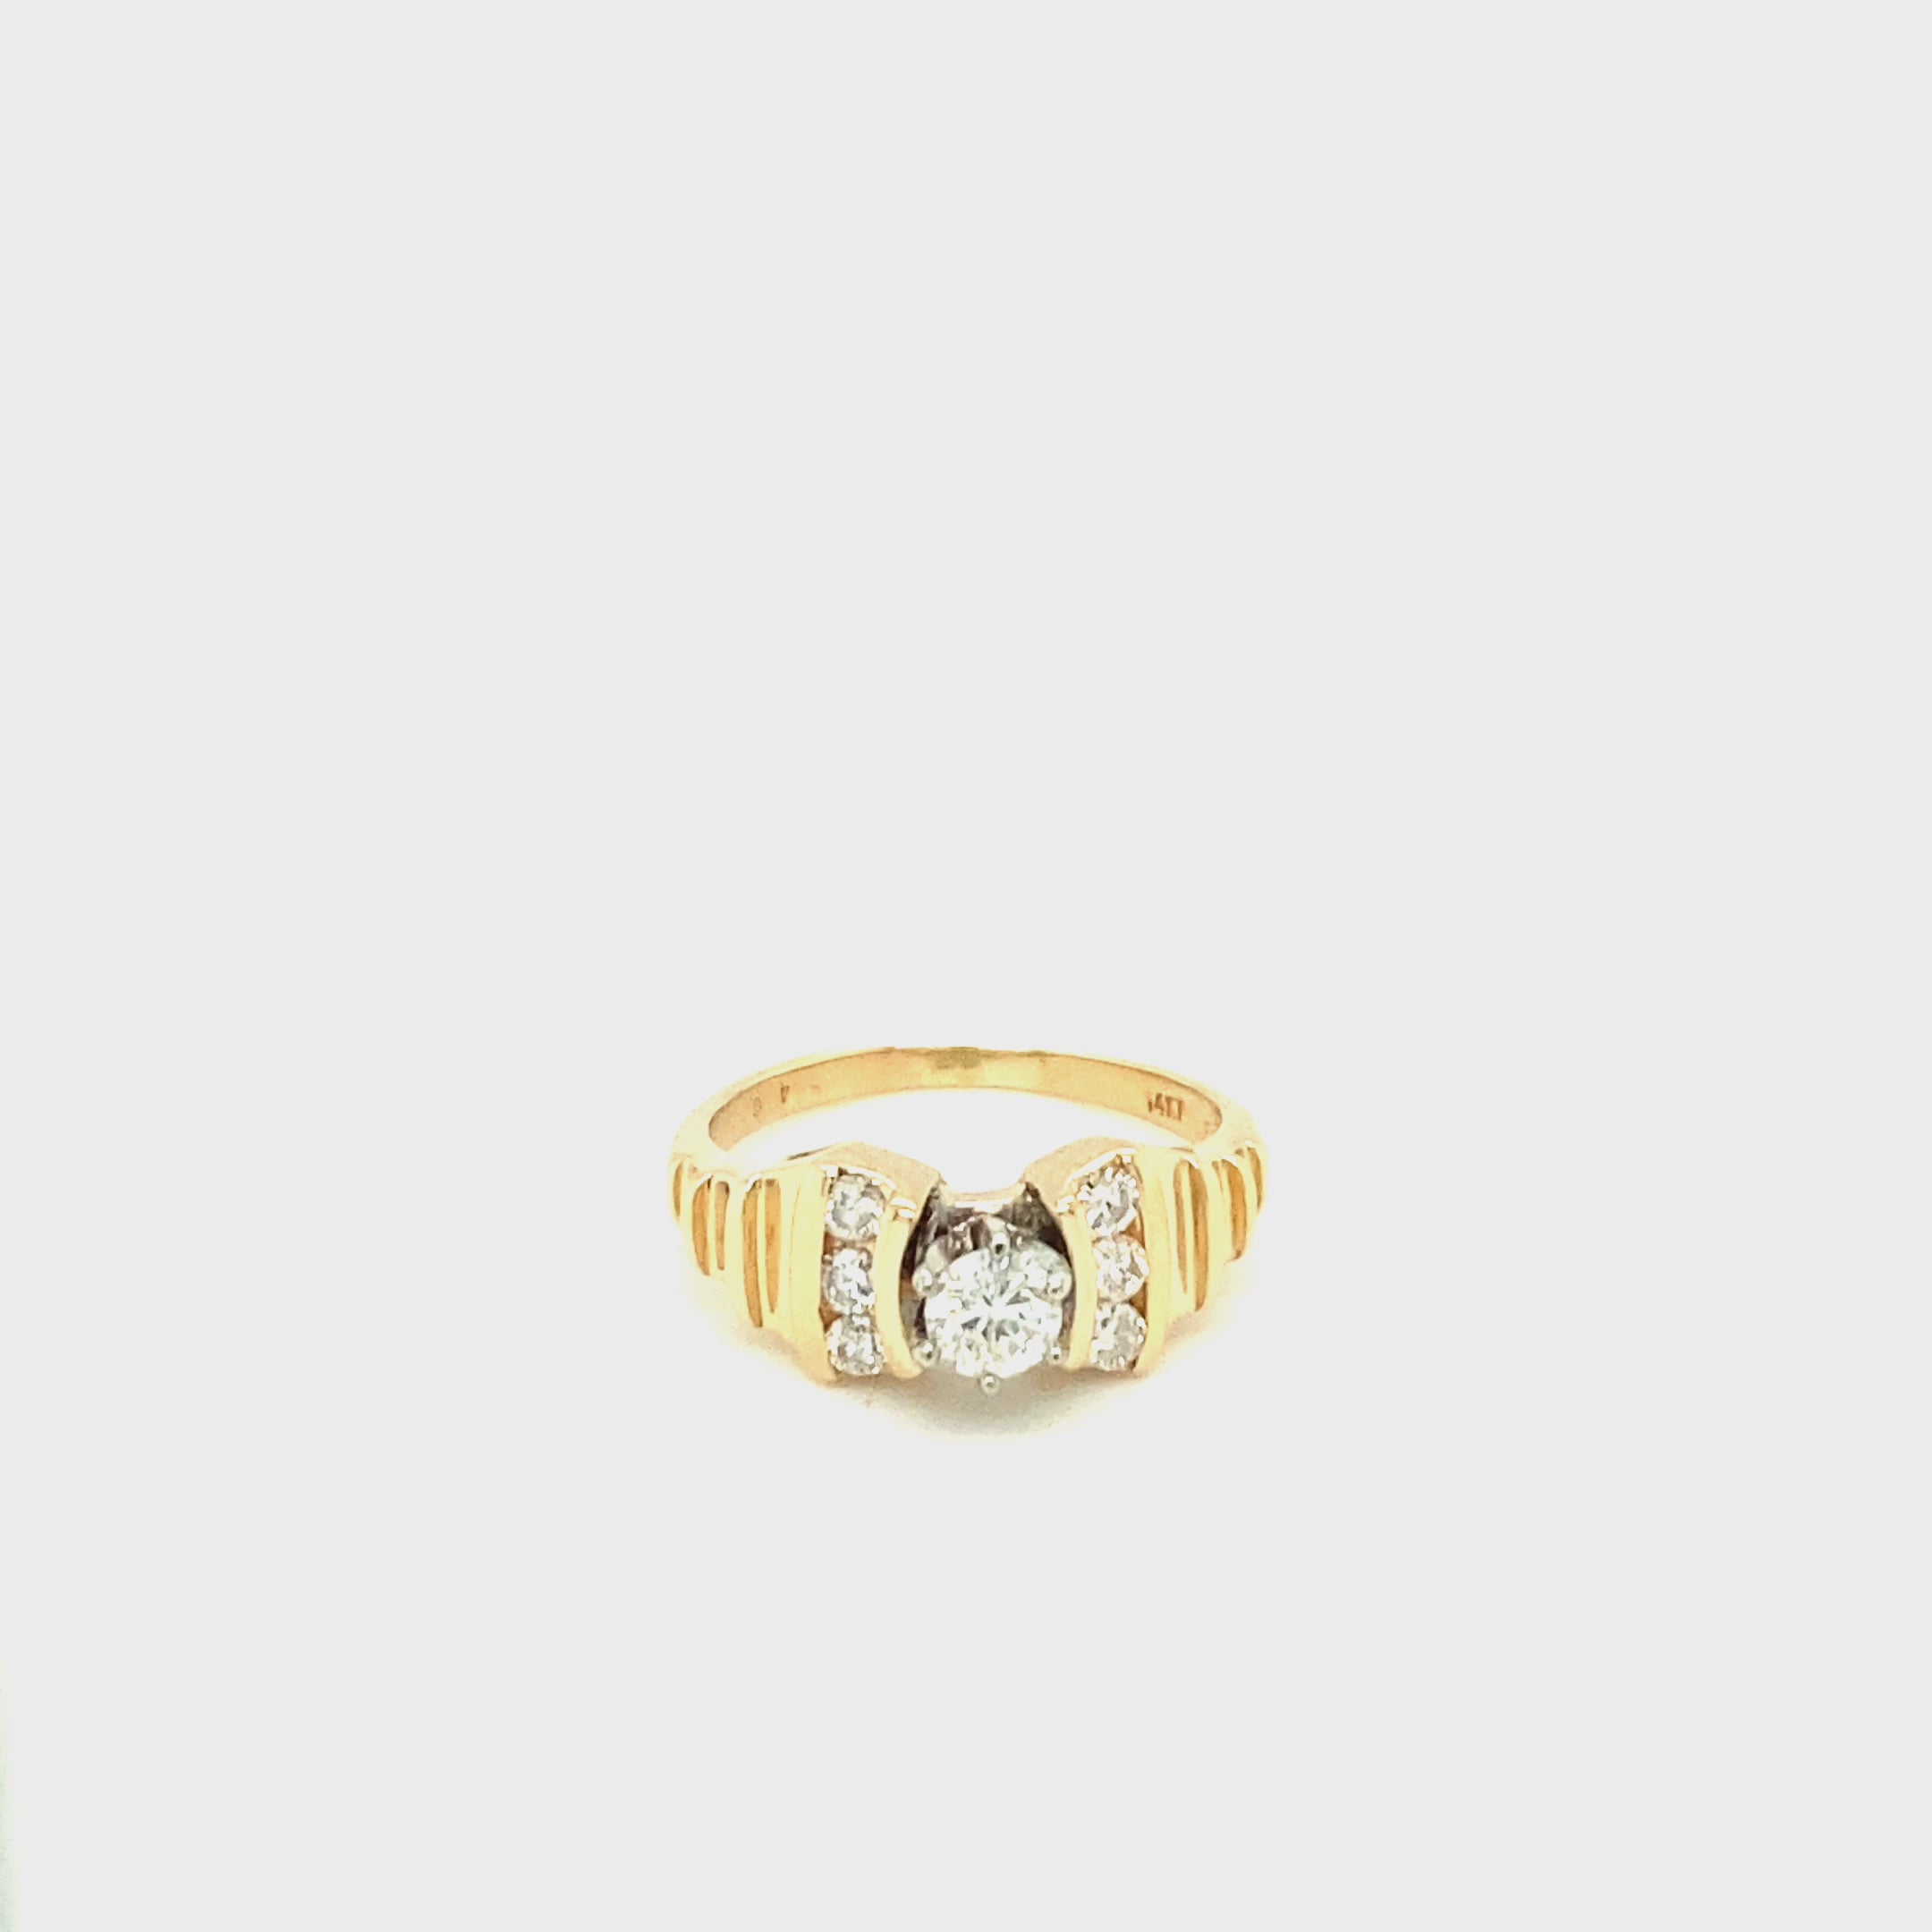 Natural Diamond Ring 14K Solid Gold .47tcw Engagement Ring Bridal Jewelry Anniversary Ring Birthstone Ring Statement Ring Estate Jewellery